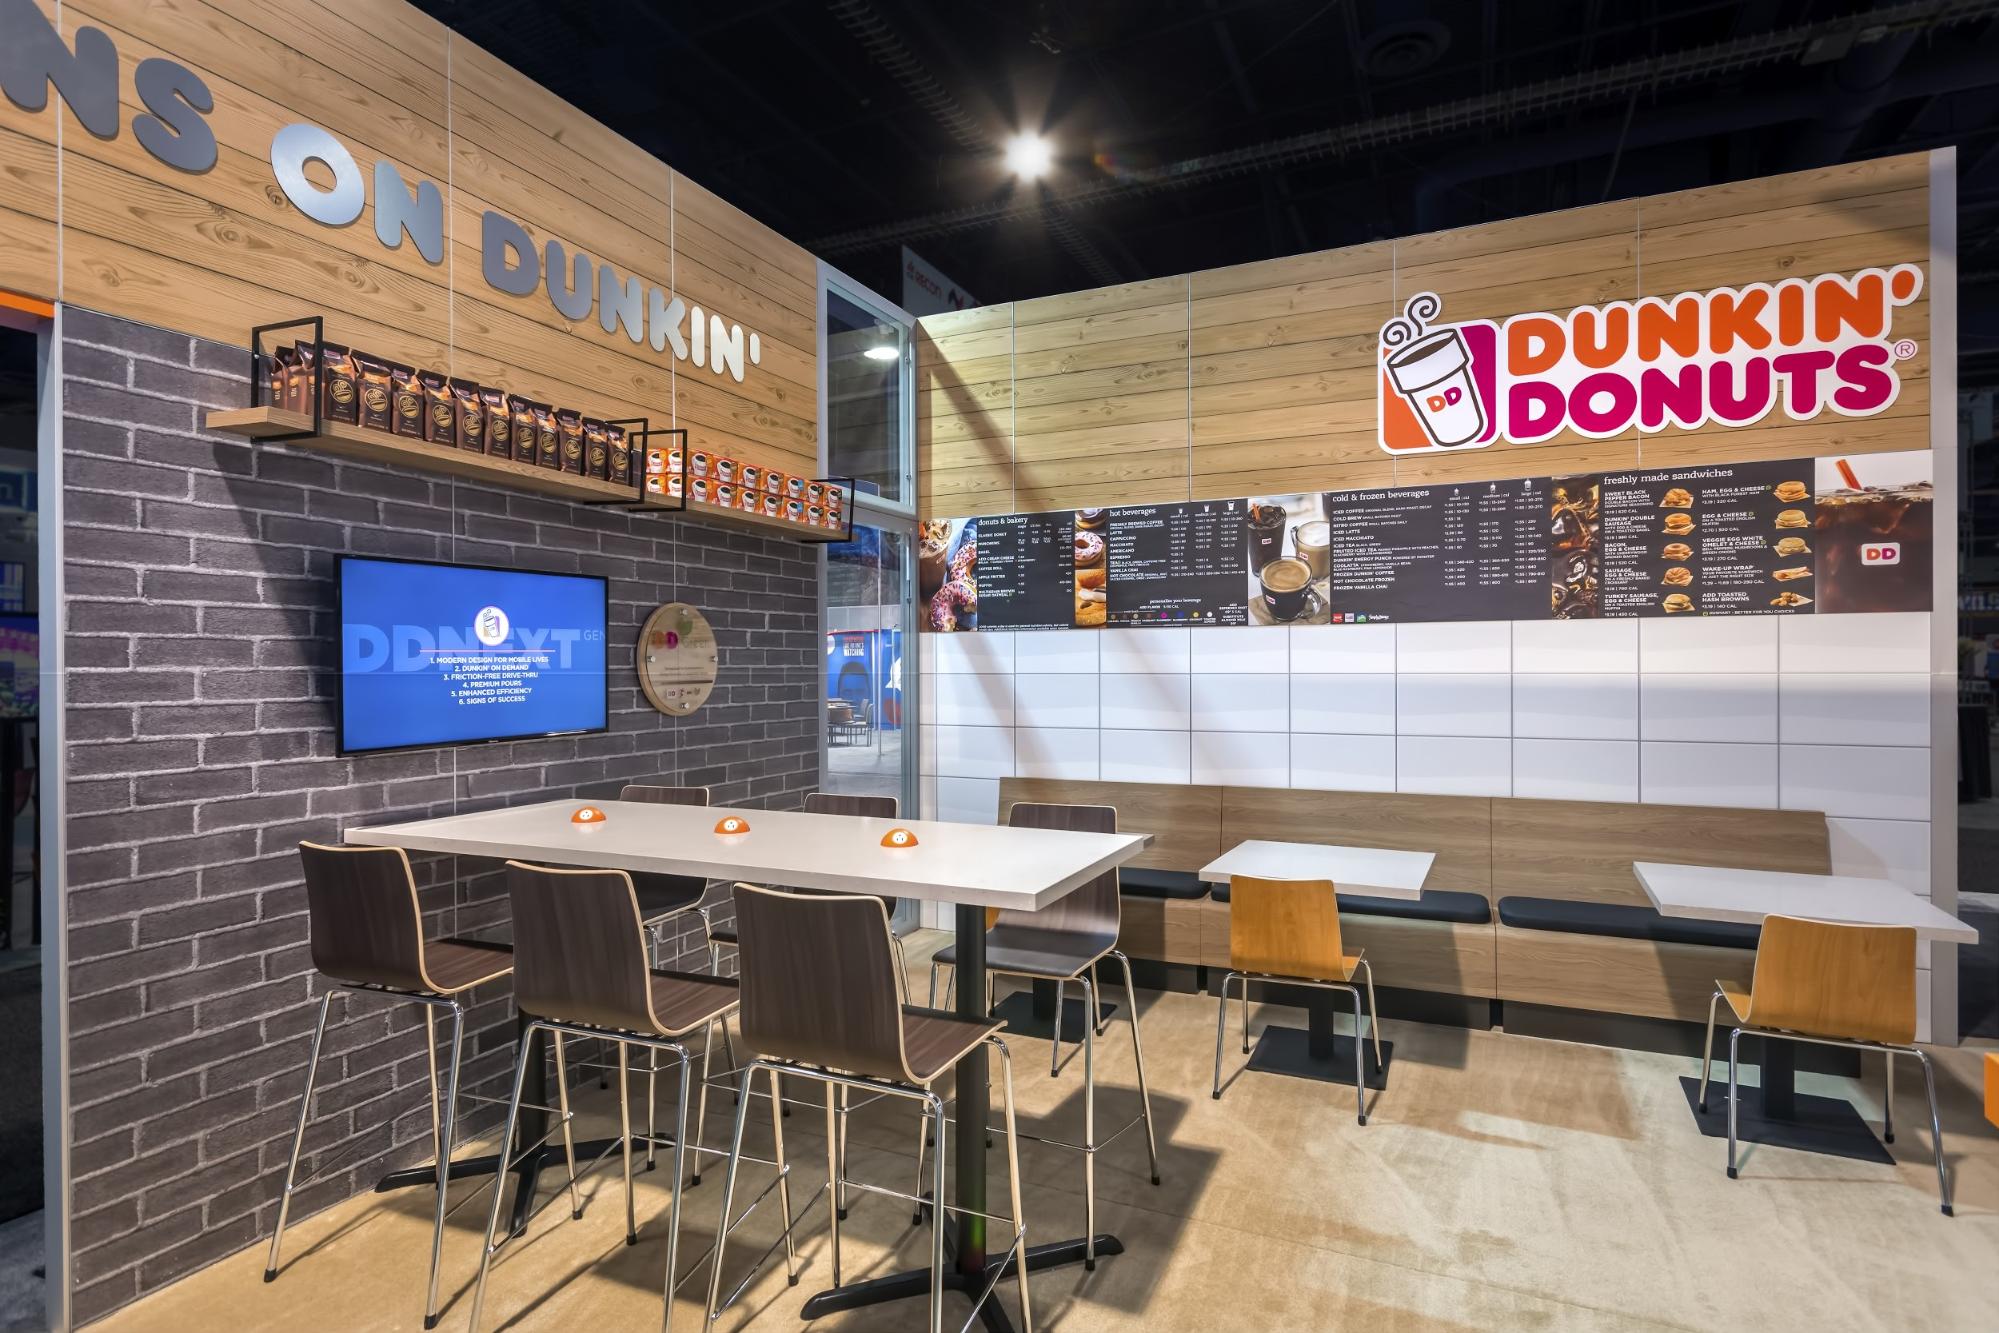 Dunkin' Donuts trade show exhibit